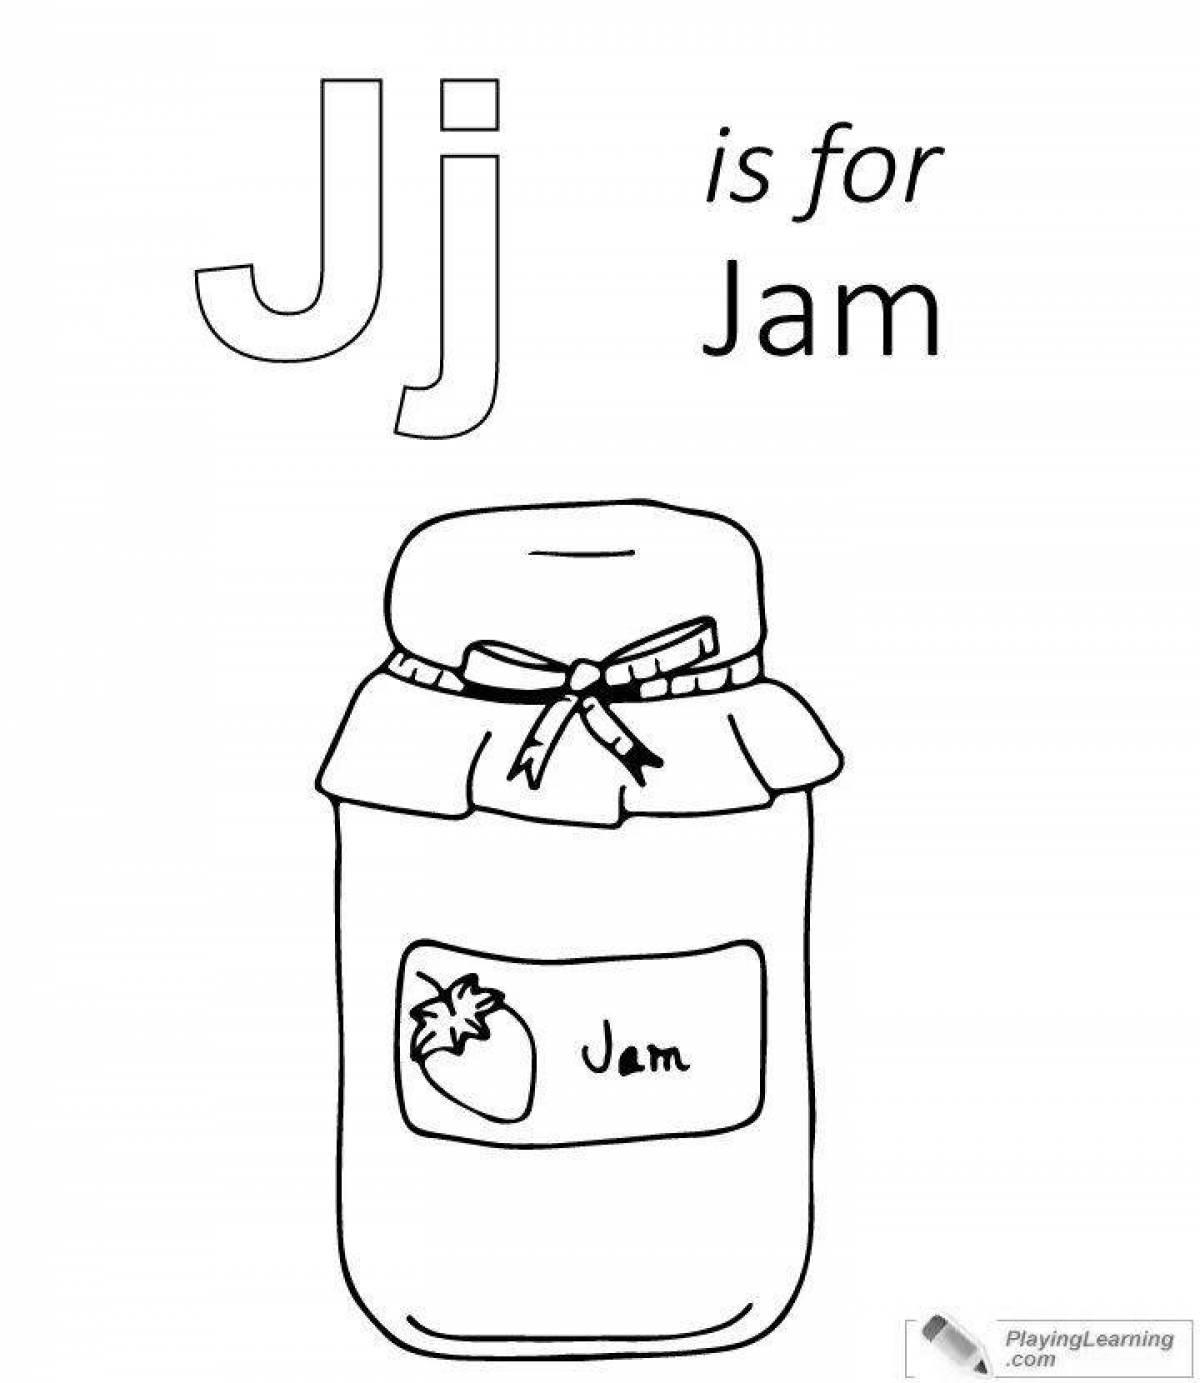 Coloring book jam in a color package